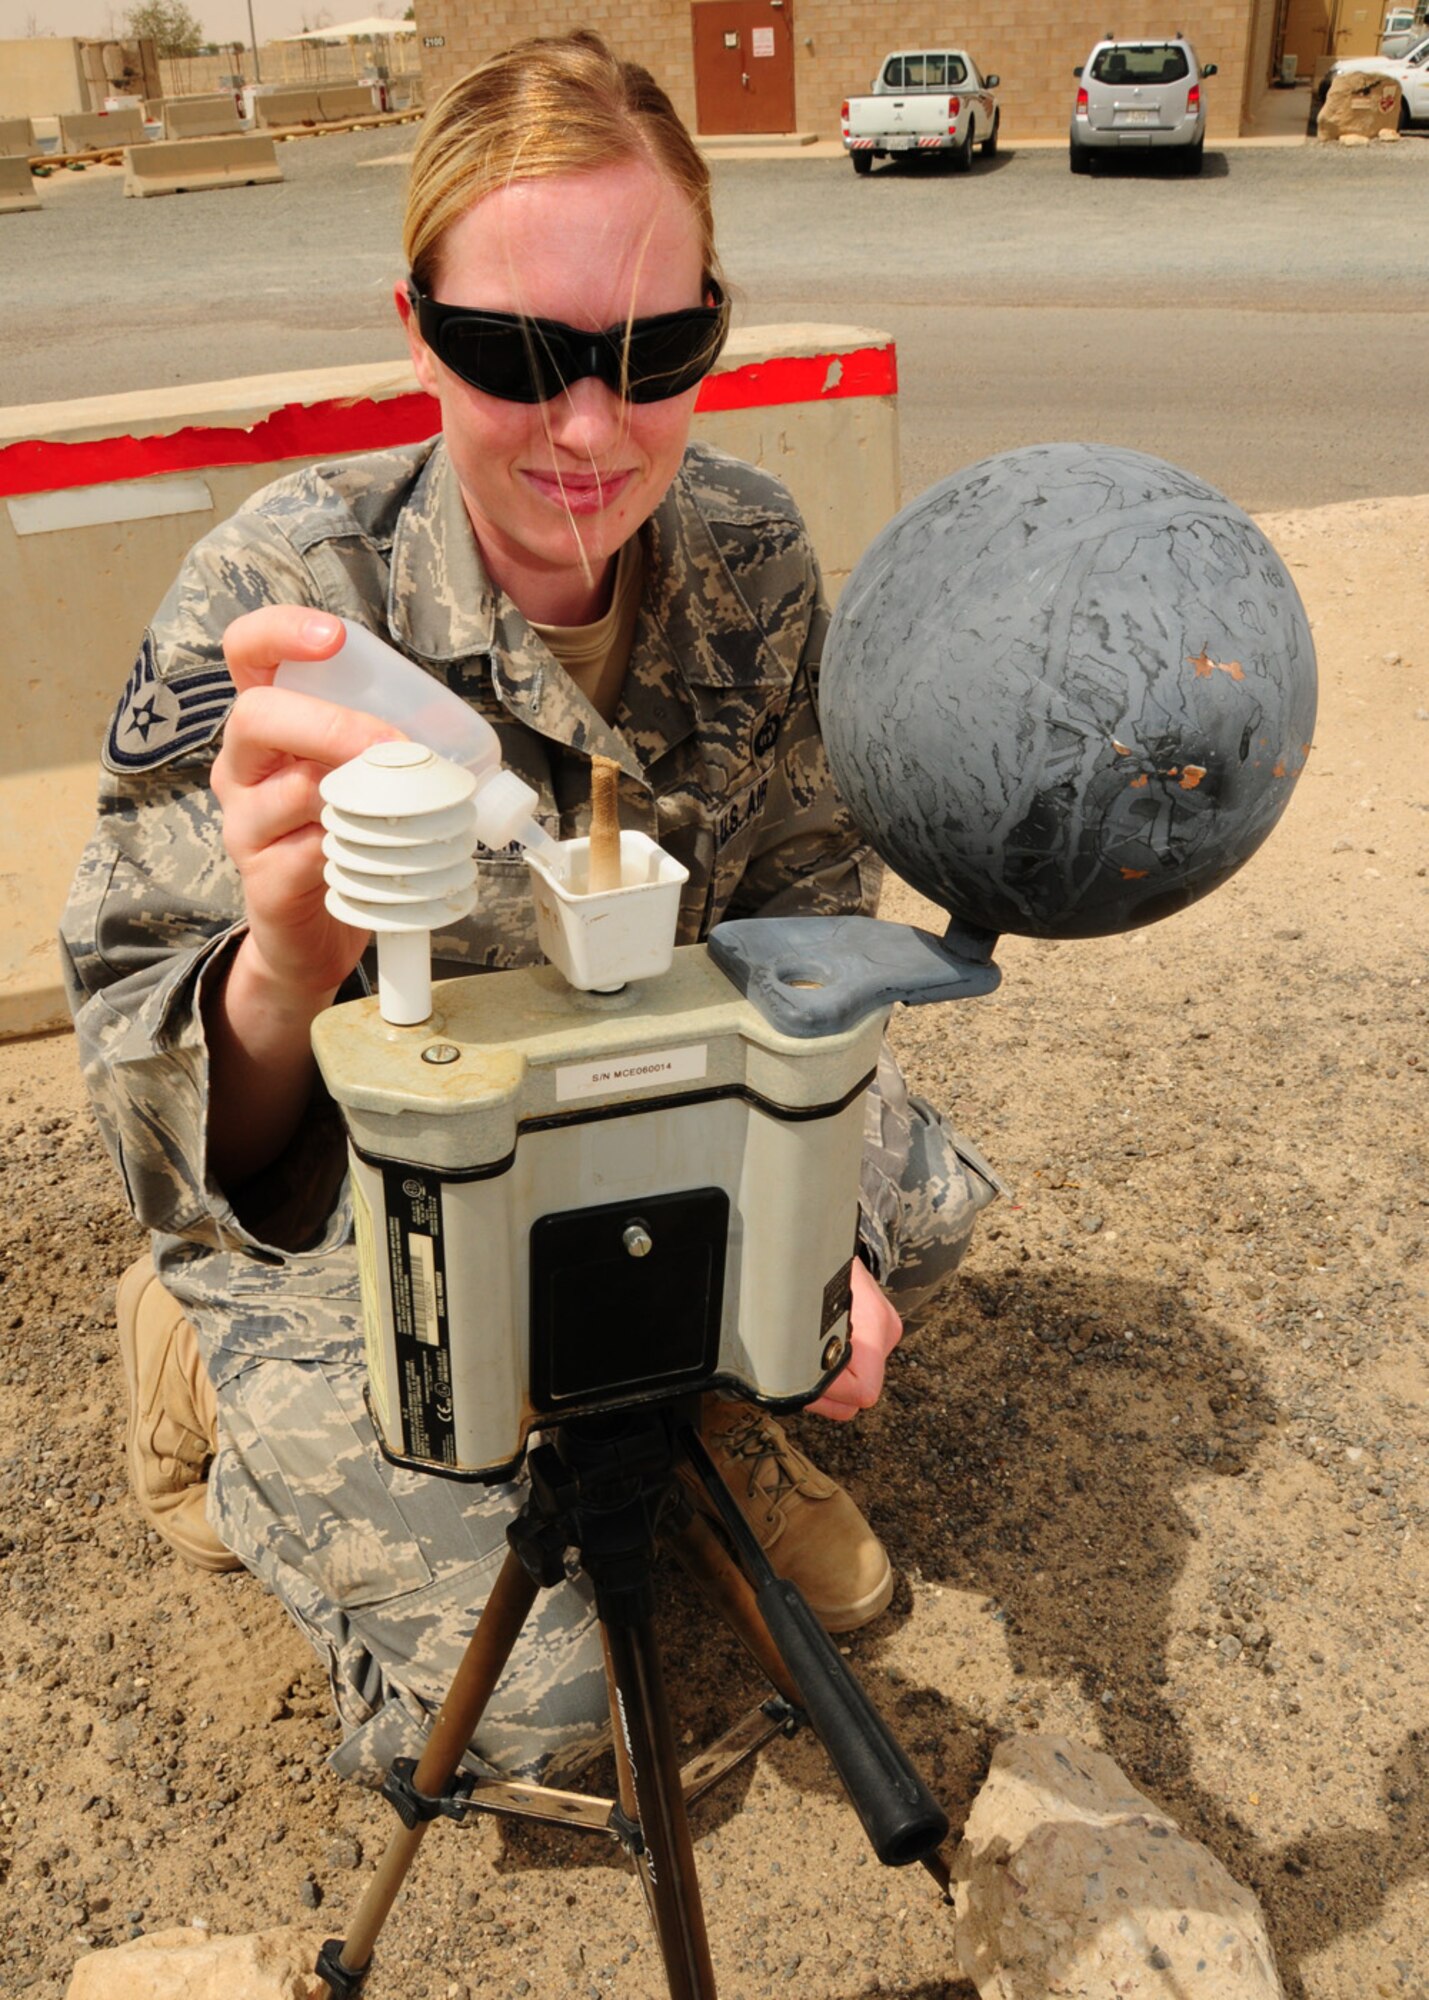 SOUTHWEST ASIA -- Staff Sgt. Stacy Vandenwyngaard, 386th Expeditionary Operations Support Squadron, adds distilled water to the heat stress monitor to ensure accurate Wet Bulb Globe temperature readings. The Wet Bulb Globe Temperature is a composite temperature used to estimate the effect of temperature, humidity, wind speed and solar radiation on humans, determining the heat stress category used for work/rest cycles. Sergeant Vandenwyngaard is currently deployed from Charleston Air Force Base, S.C., and is originally from Appleton, Wis. (U.S. Air Force photo/ Senior Airman Courtney Richardson)